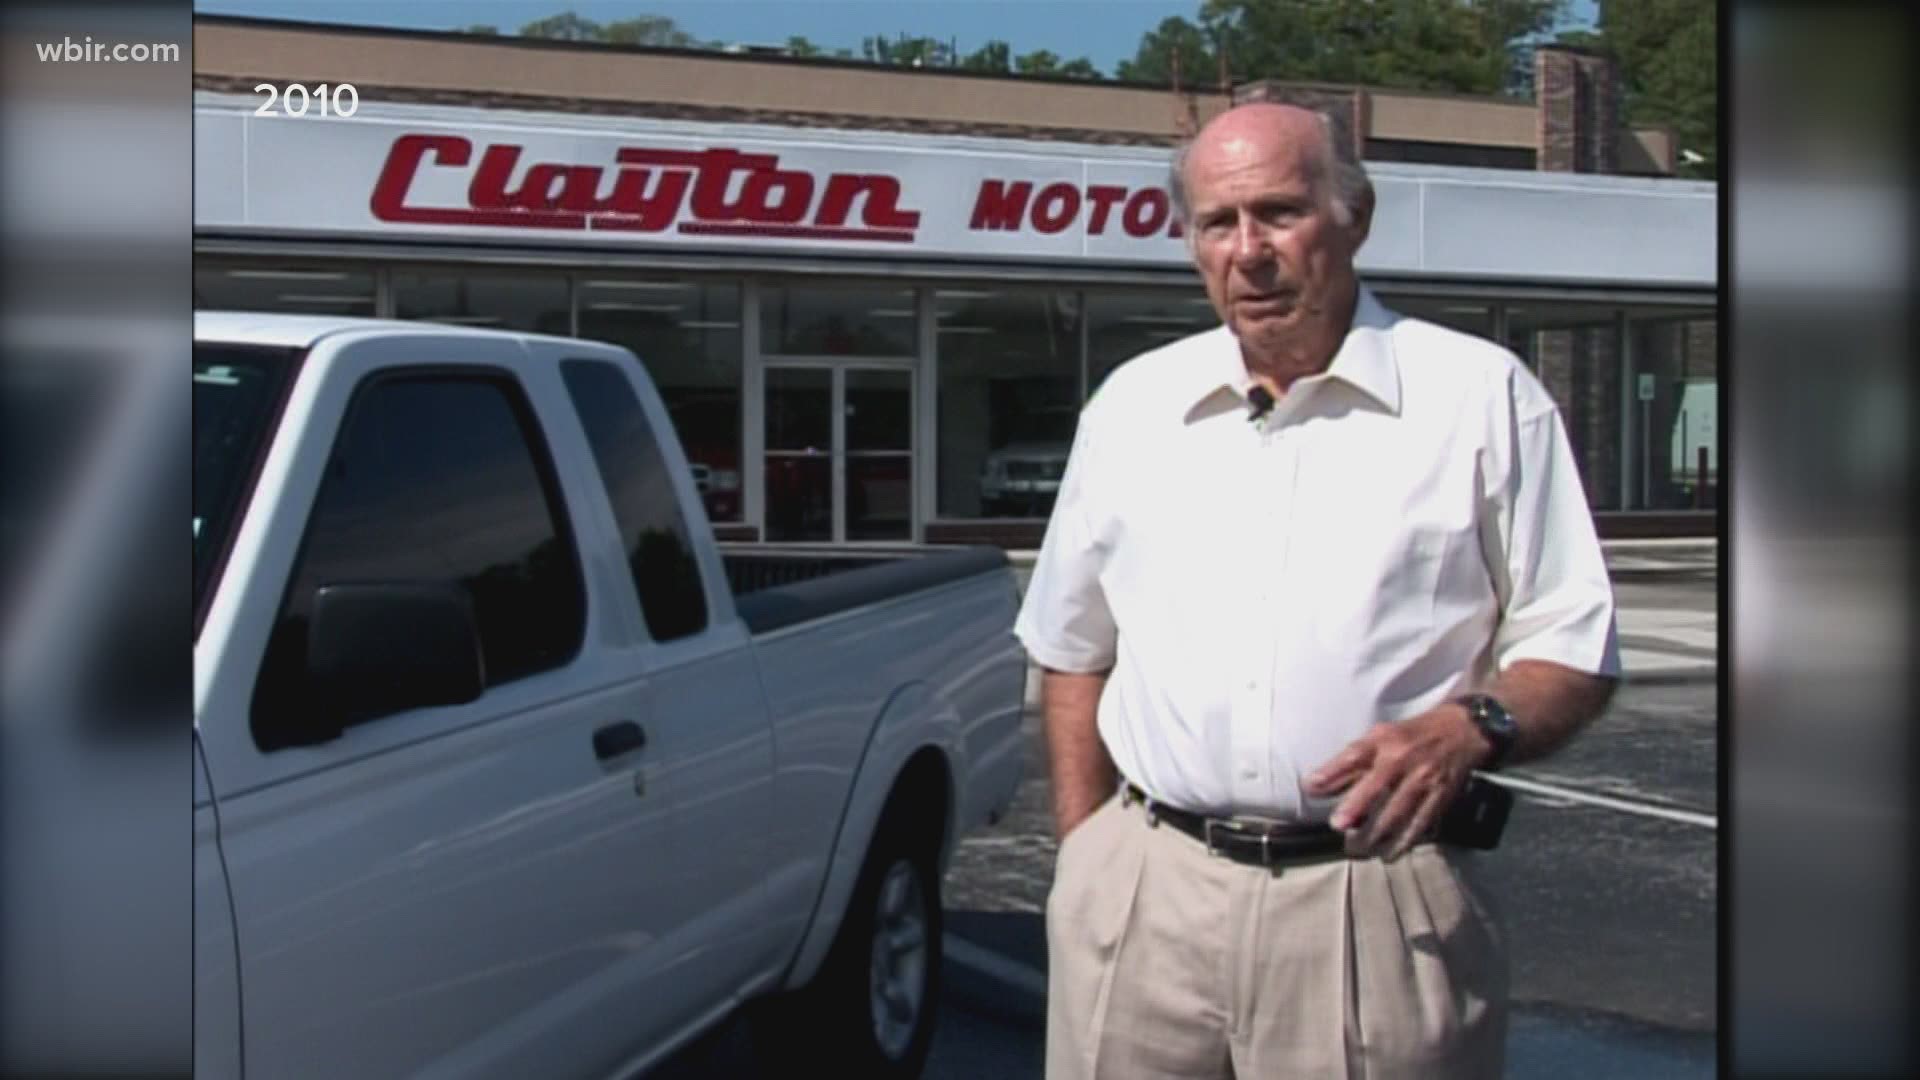 A helicopter crash in the Tennessee River killed Joe Clayton, of "Clayton Automobiles" and "Clayton Homes."